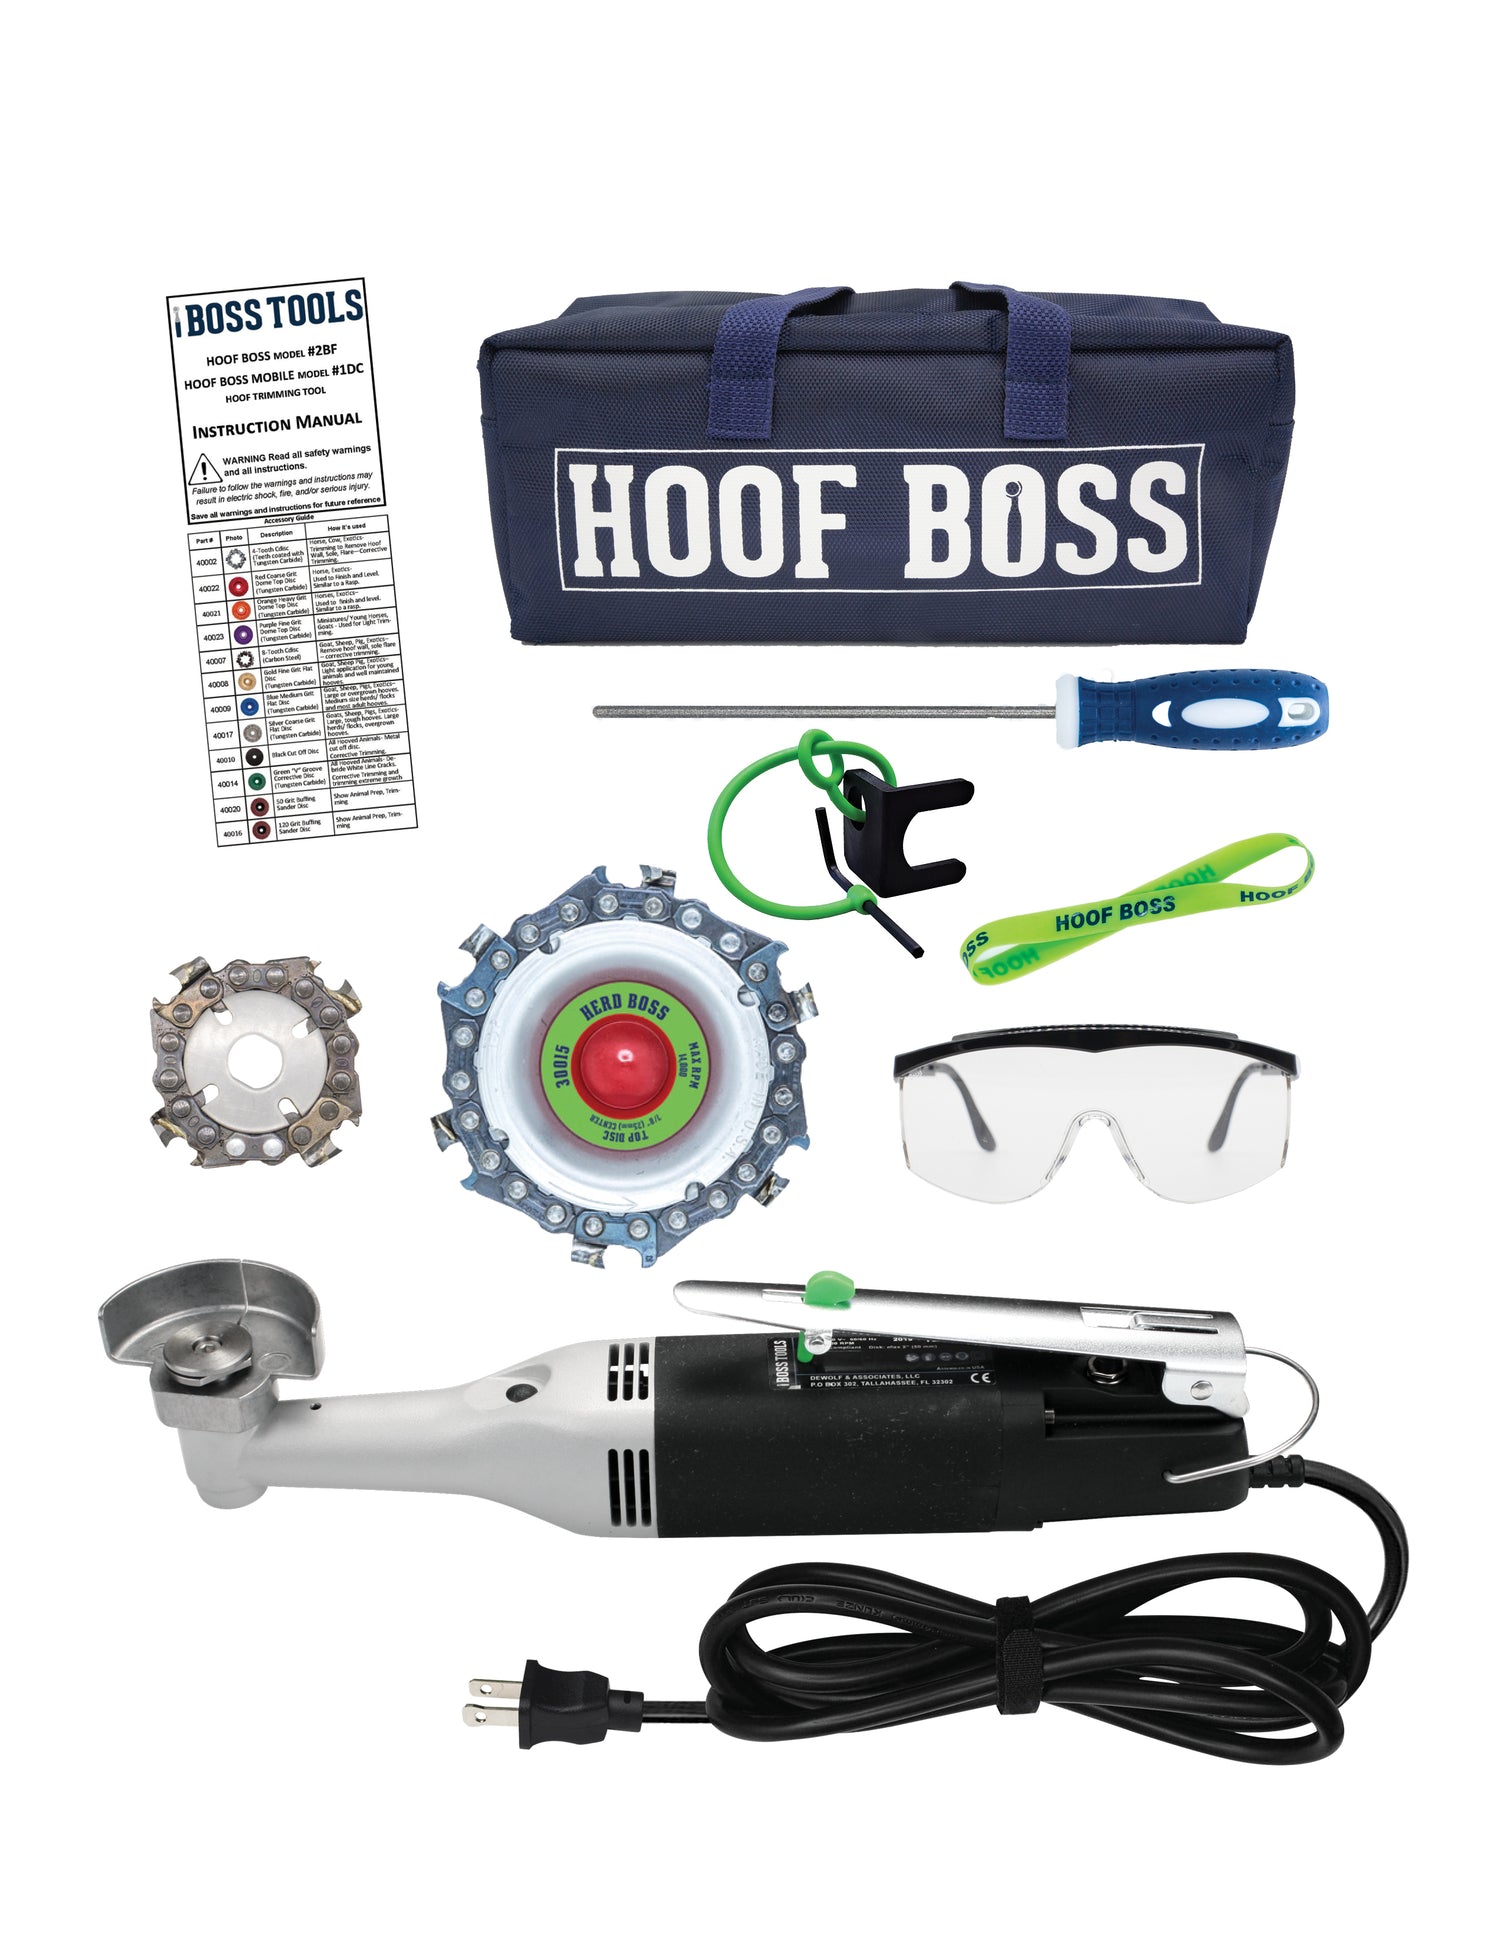 Complete Dairy Cow Hoof Electric Trimming Set